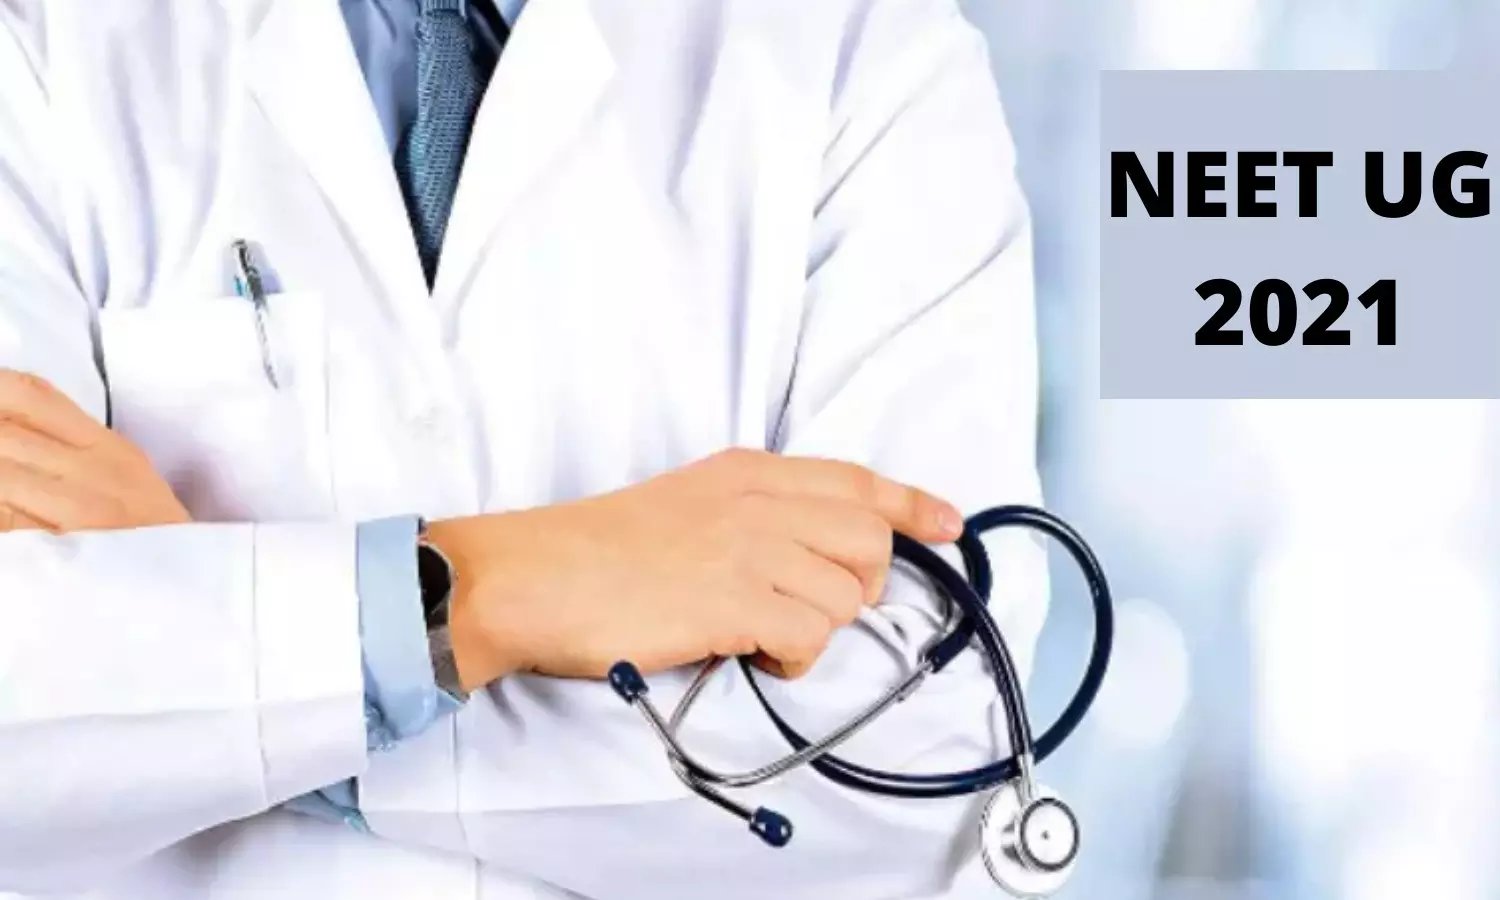 NEET 2021 Candidates allege discrepancy in OMR sheets, results: Supreme Court issues notice